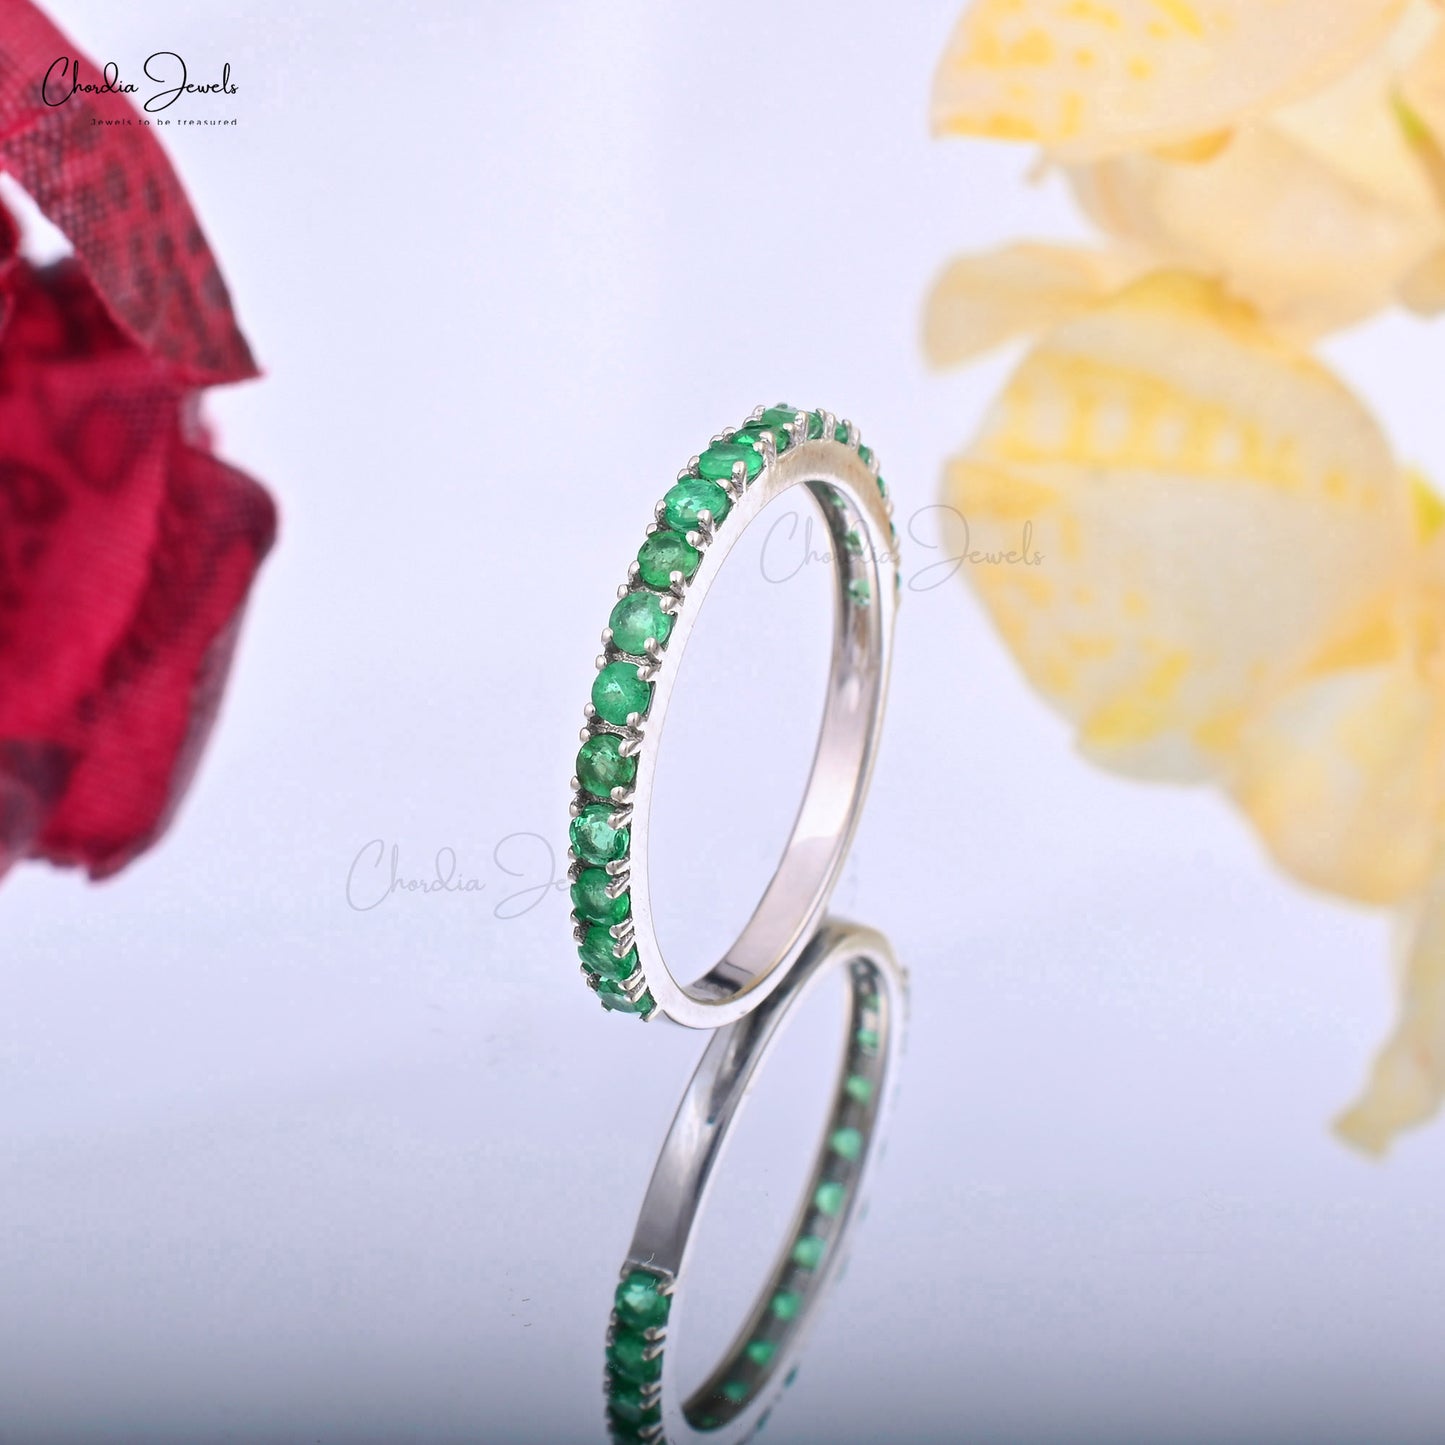 Discover the perfect blend of style with this emerald eternity ring